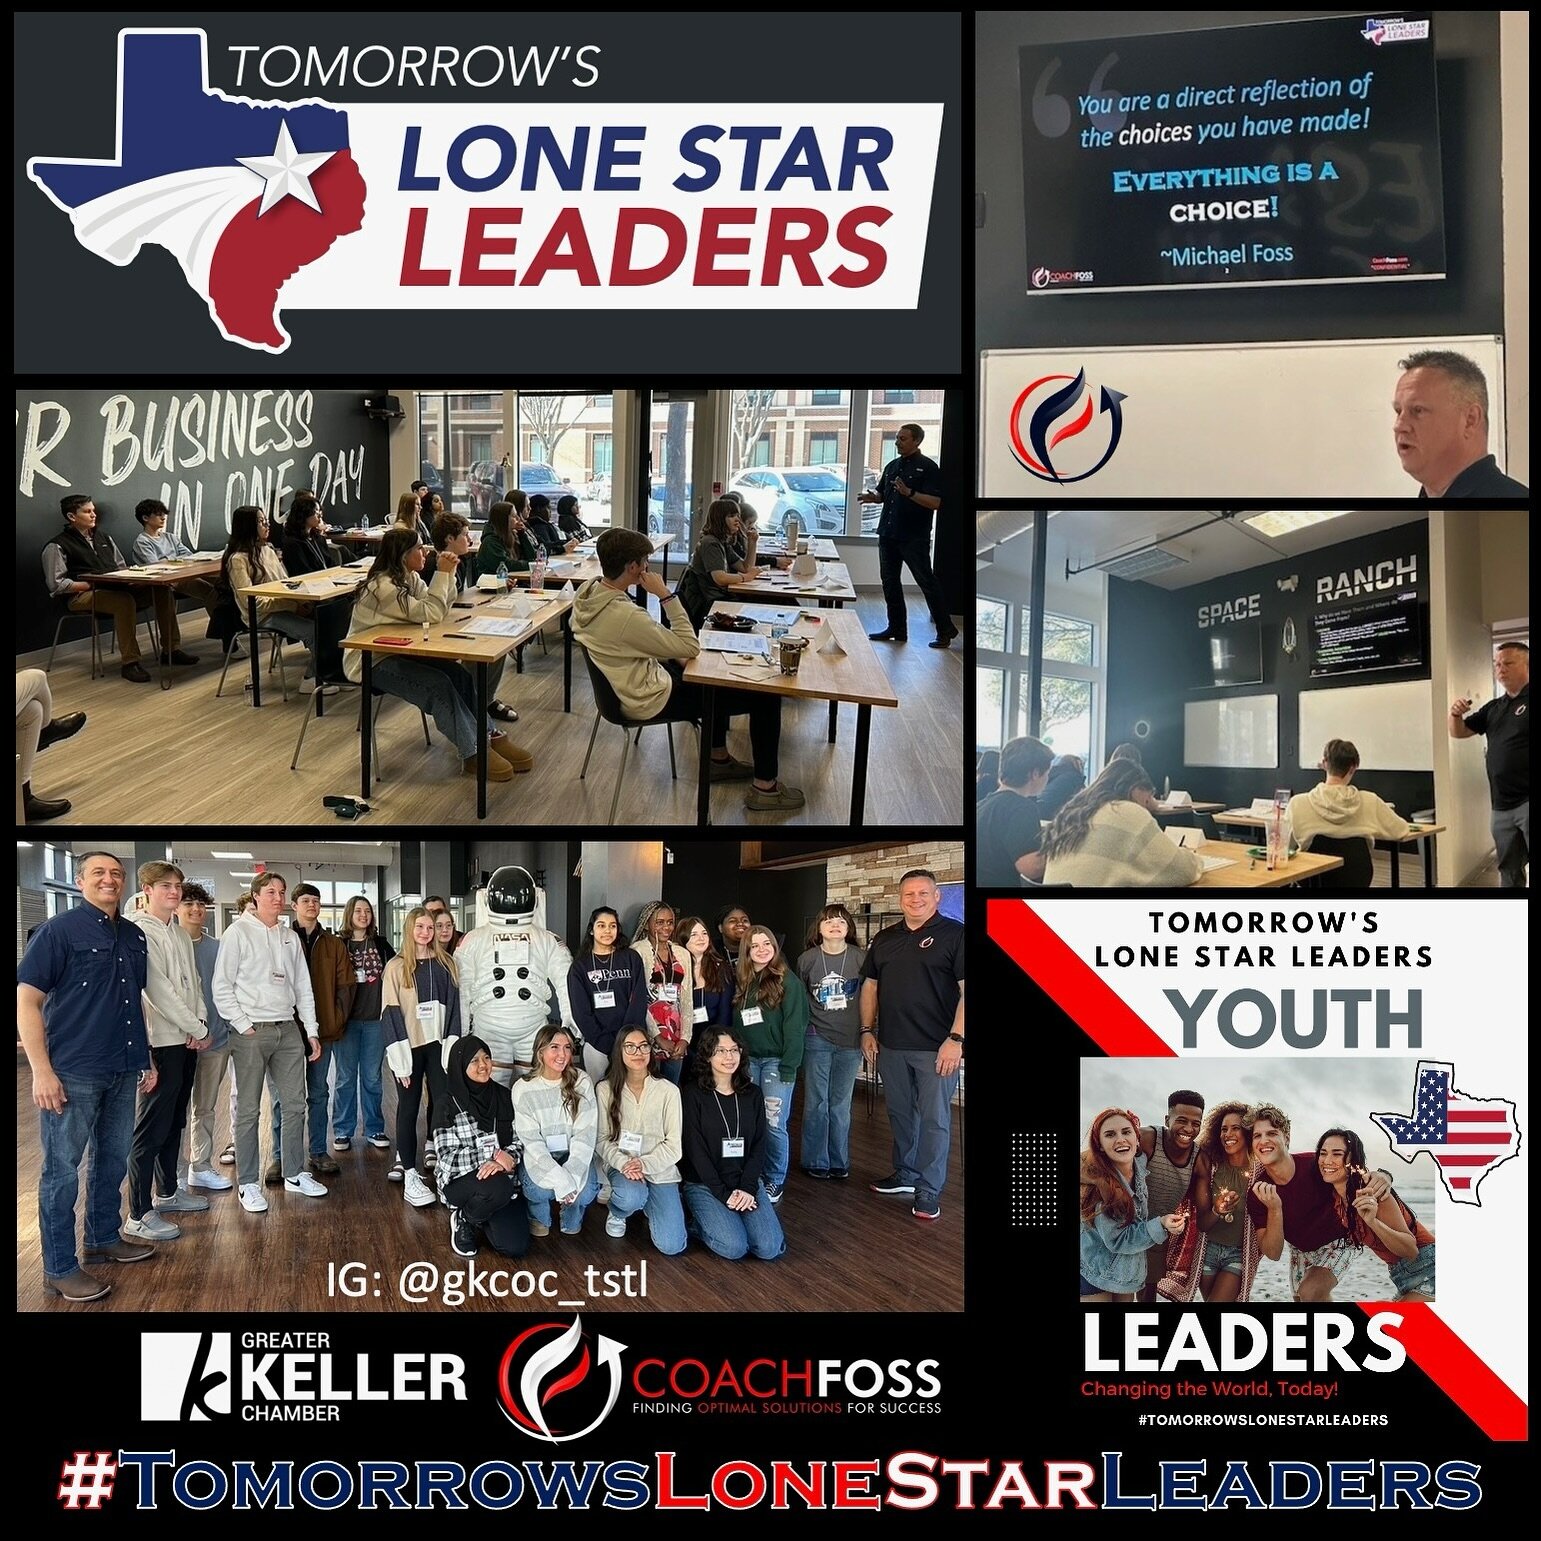 CoachFoss LLC and the Greater Keller Chamber of Commerce (of Keller, Texas, in the DFW area) launched an elite leadership development High School program called &ldquo;Tomorrow&rsquo;s Lone Star Leaders&rdquo; last month. We met at Genie Rocket in Ke